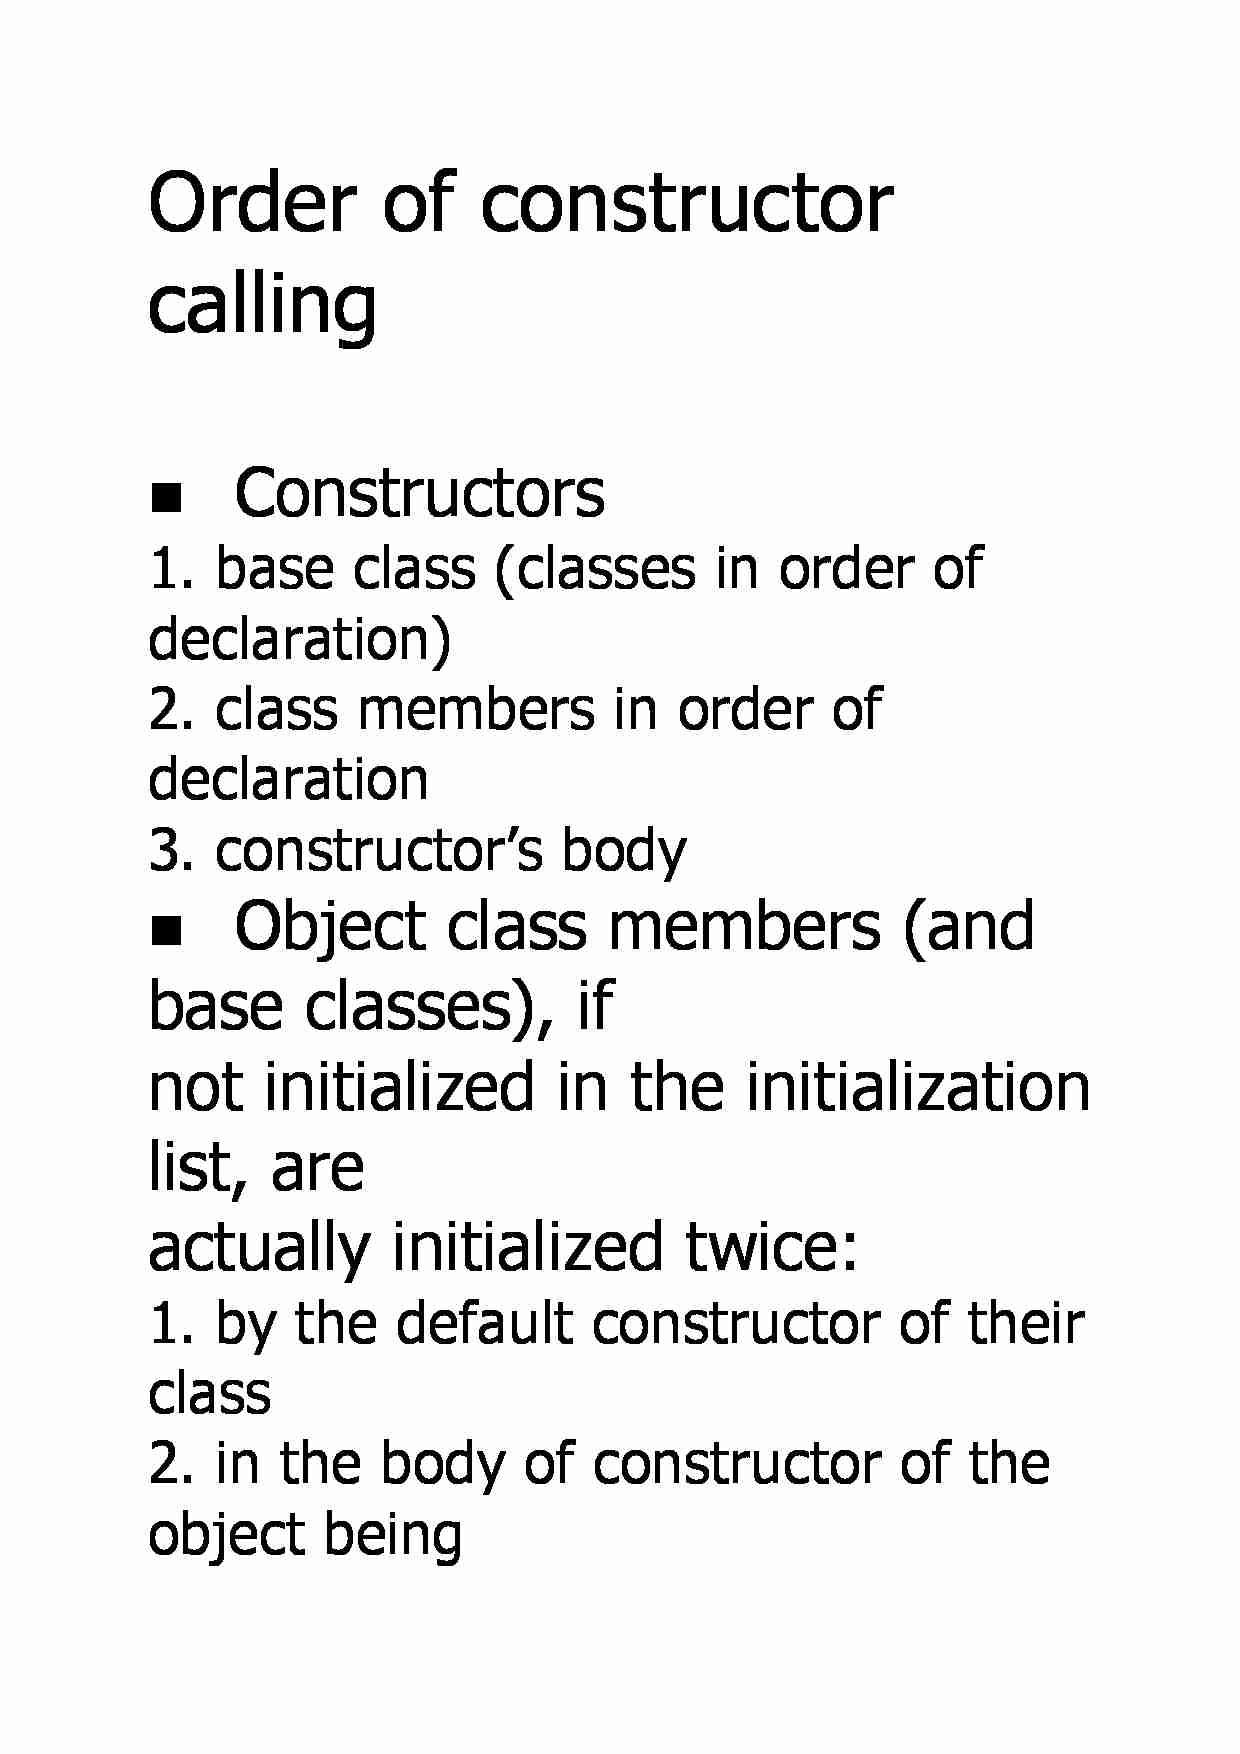 Order of constructor calling - strona 1